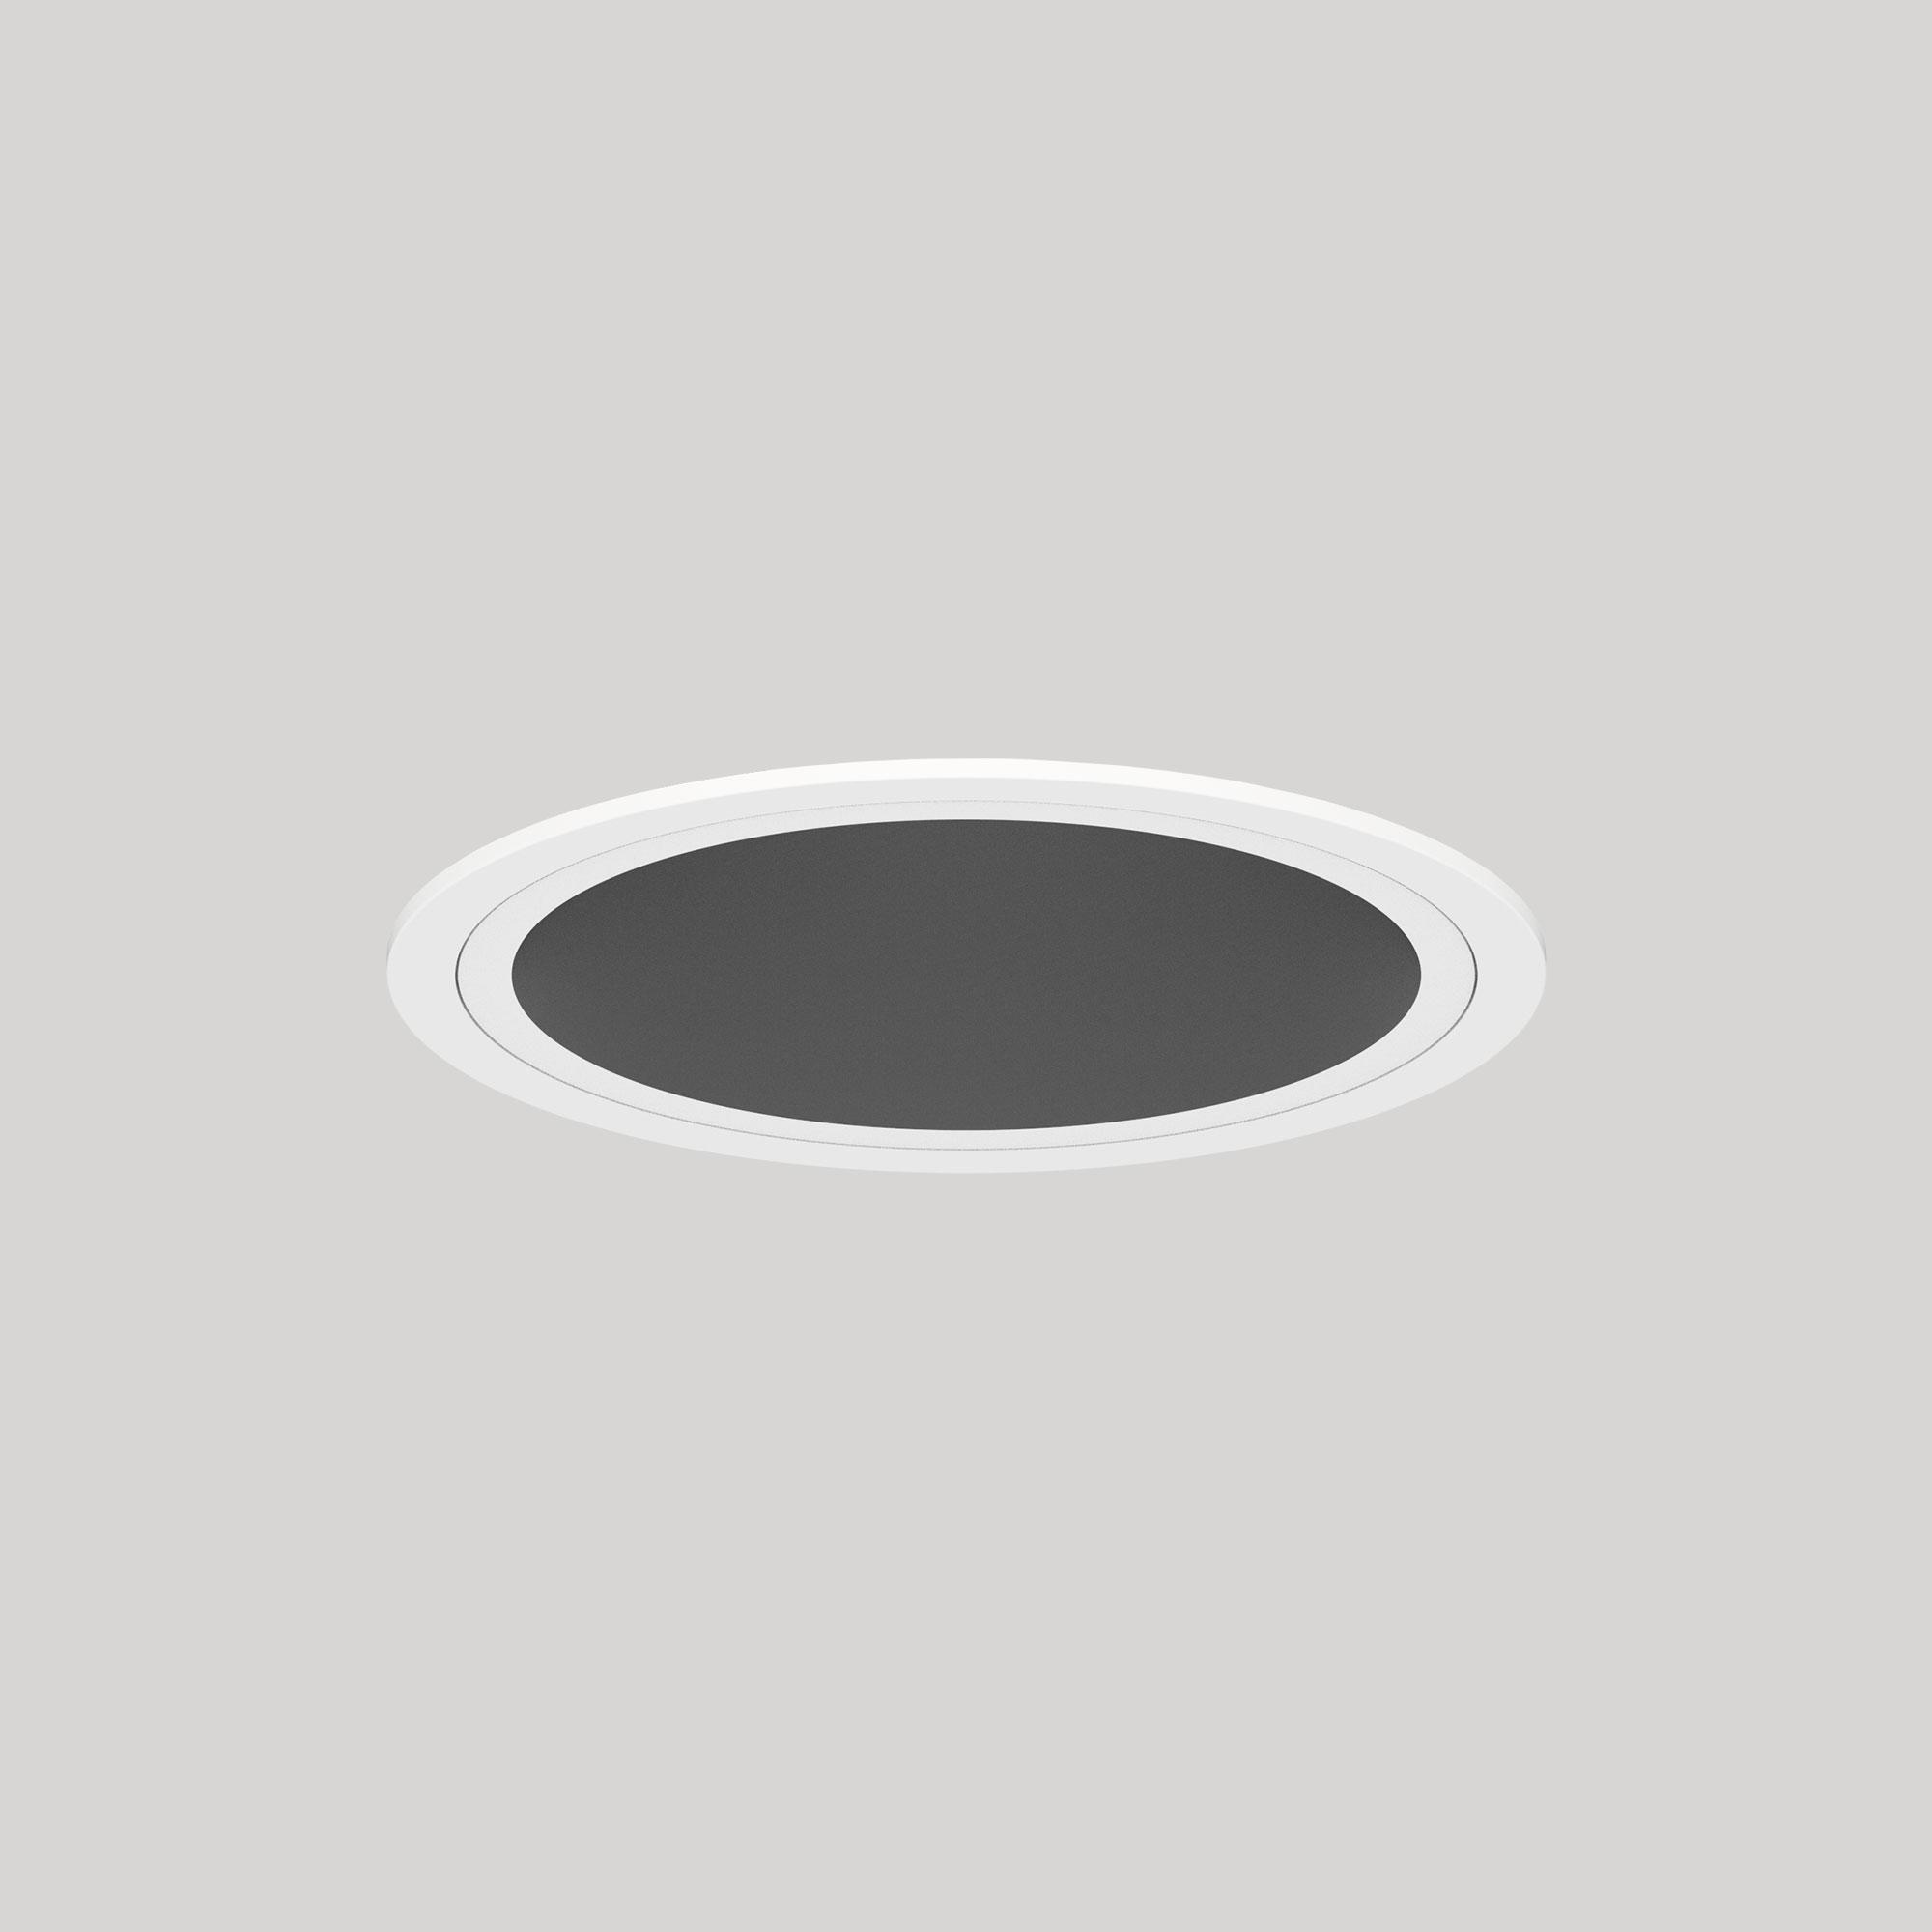 Standard 114mm Ceiling Recessed Round Fixed STD-E01C0H-WBP - Standard-STD-E01-WB-Installed.jpg